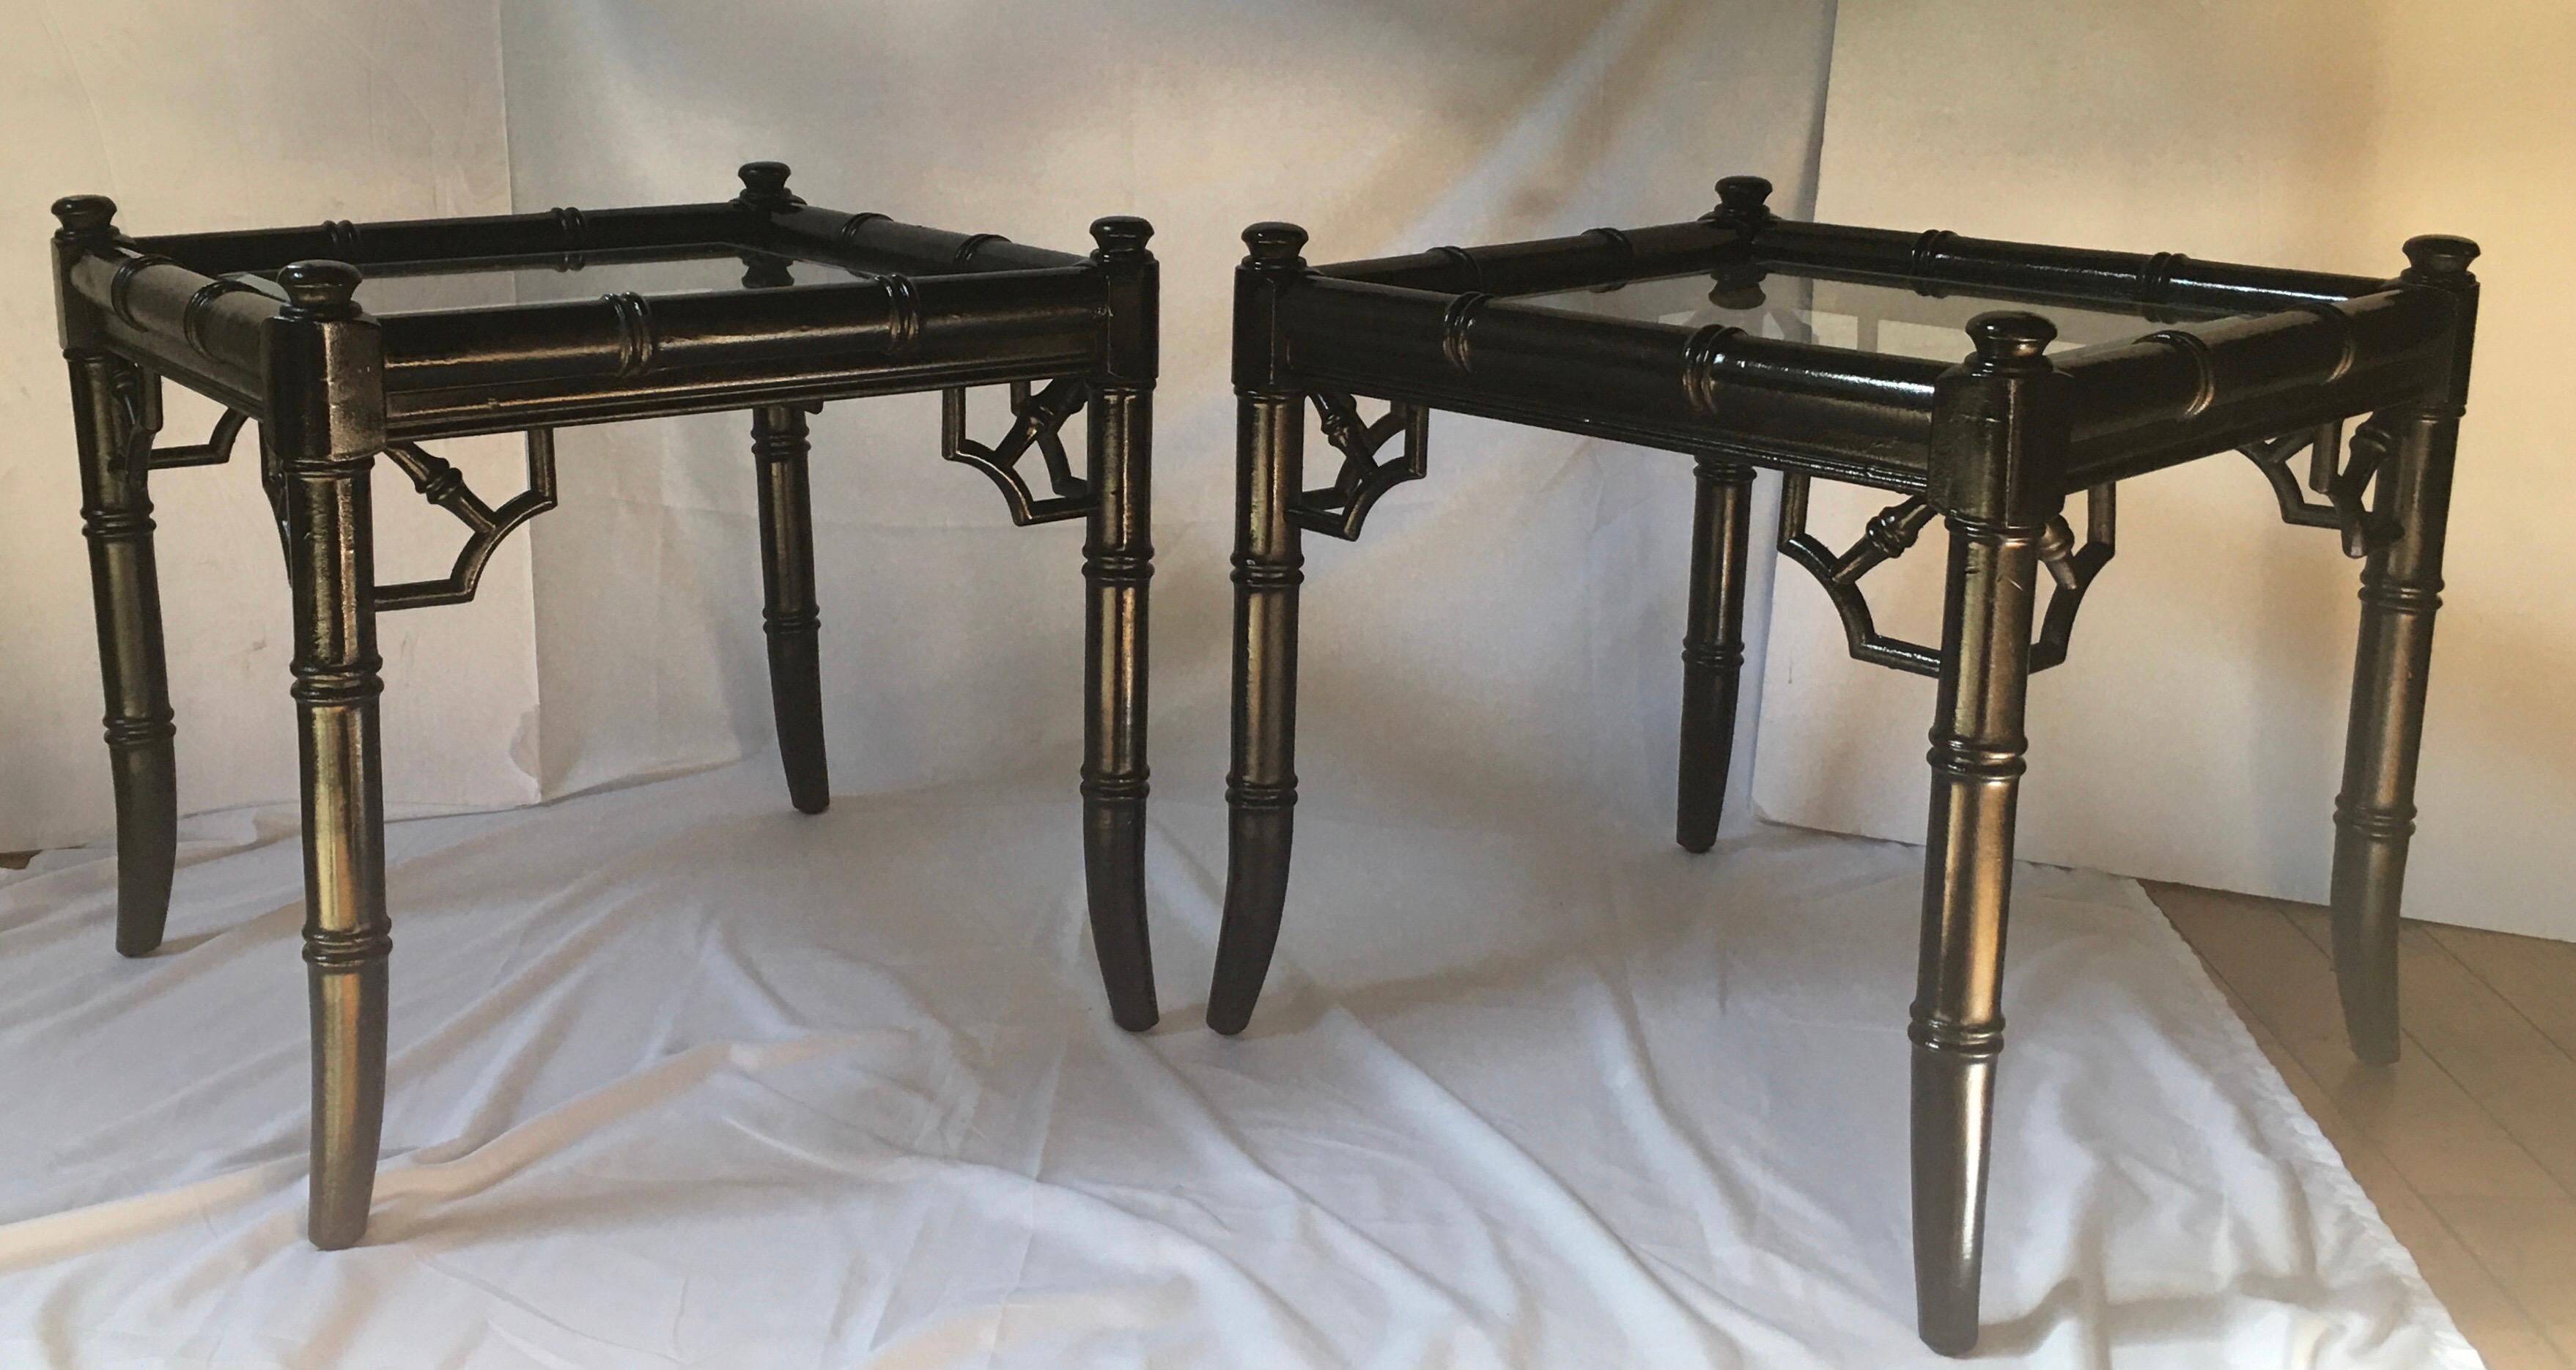 Pair of chinoiserie style faux bamboo reed bunching cocktail tables. These square end or side tables feature gloss black painted wood frames with clear beveled glass inserts and fretwork details. These Hollywood Regency style tables are a nice size